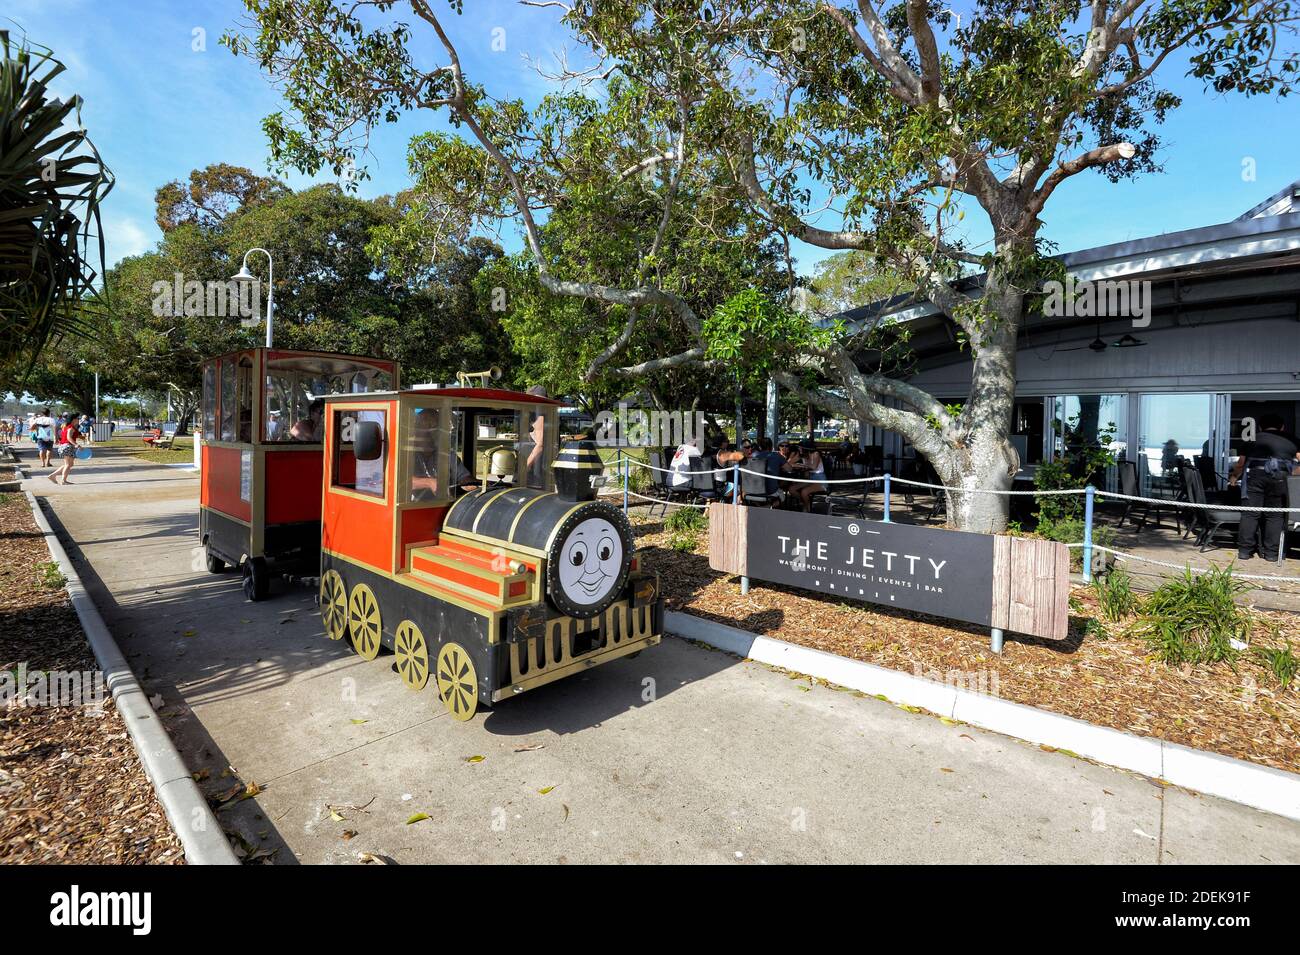 Children's Thomas the Tank Engine train ride in front of the Jetty Restaurant on the parade seafront, Bongaree, Bribie Island, Sunshine Coast, Queensl Stock Photo